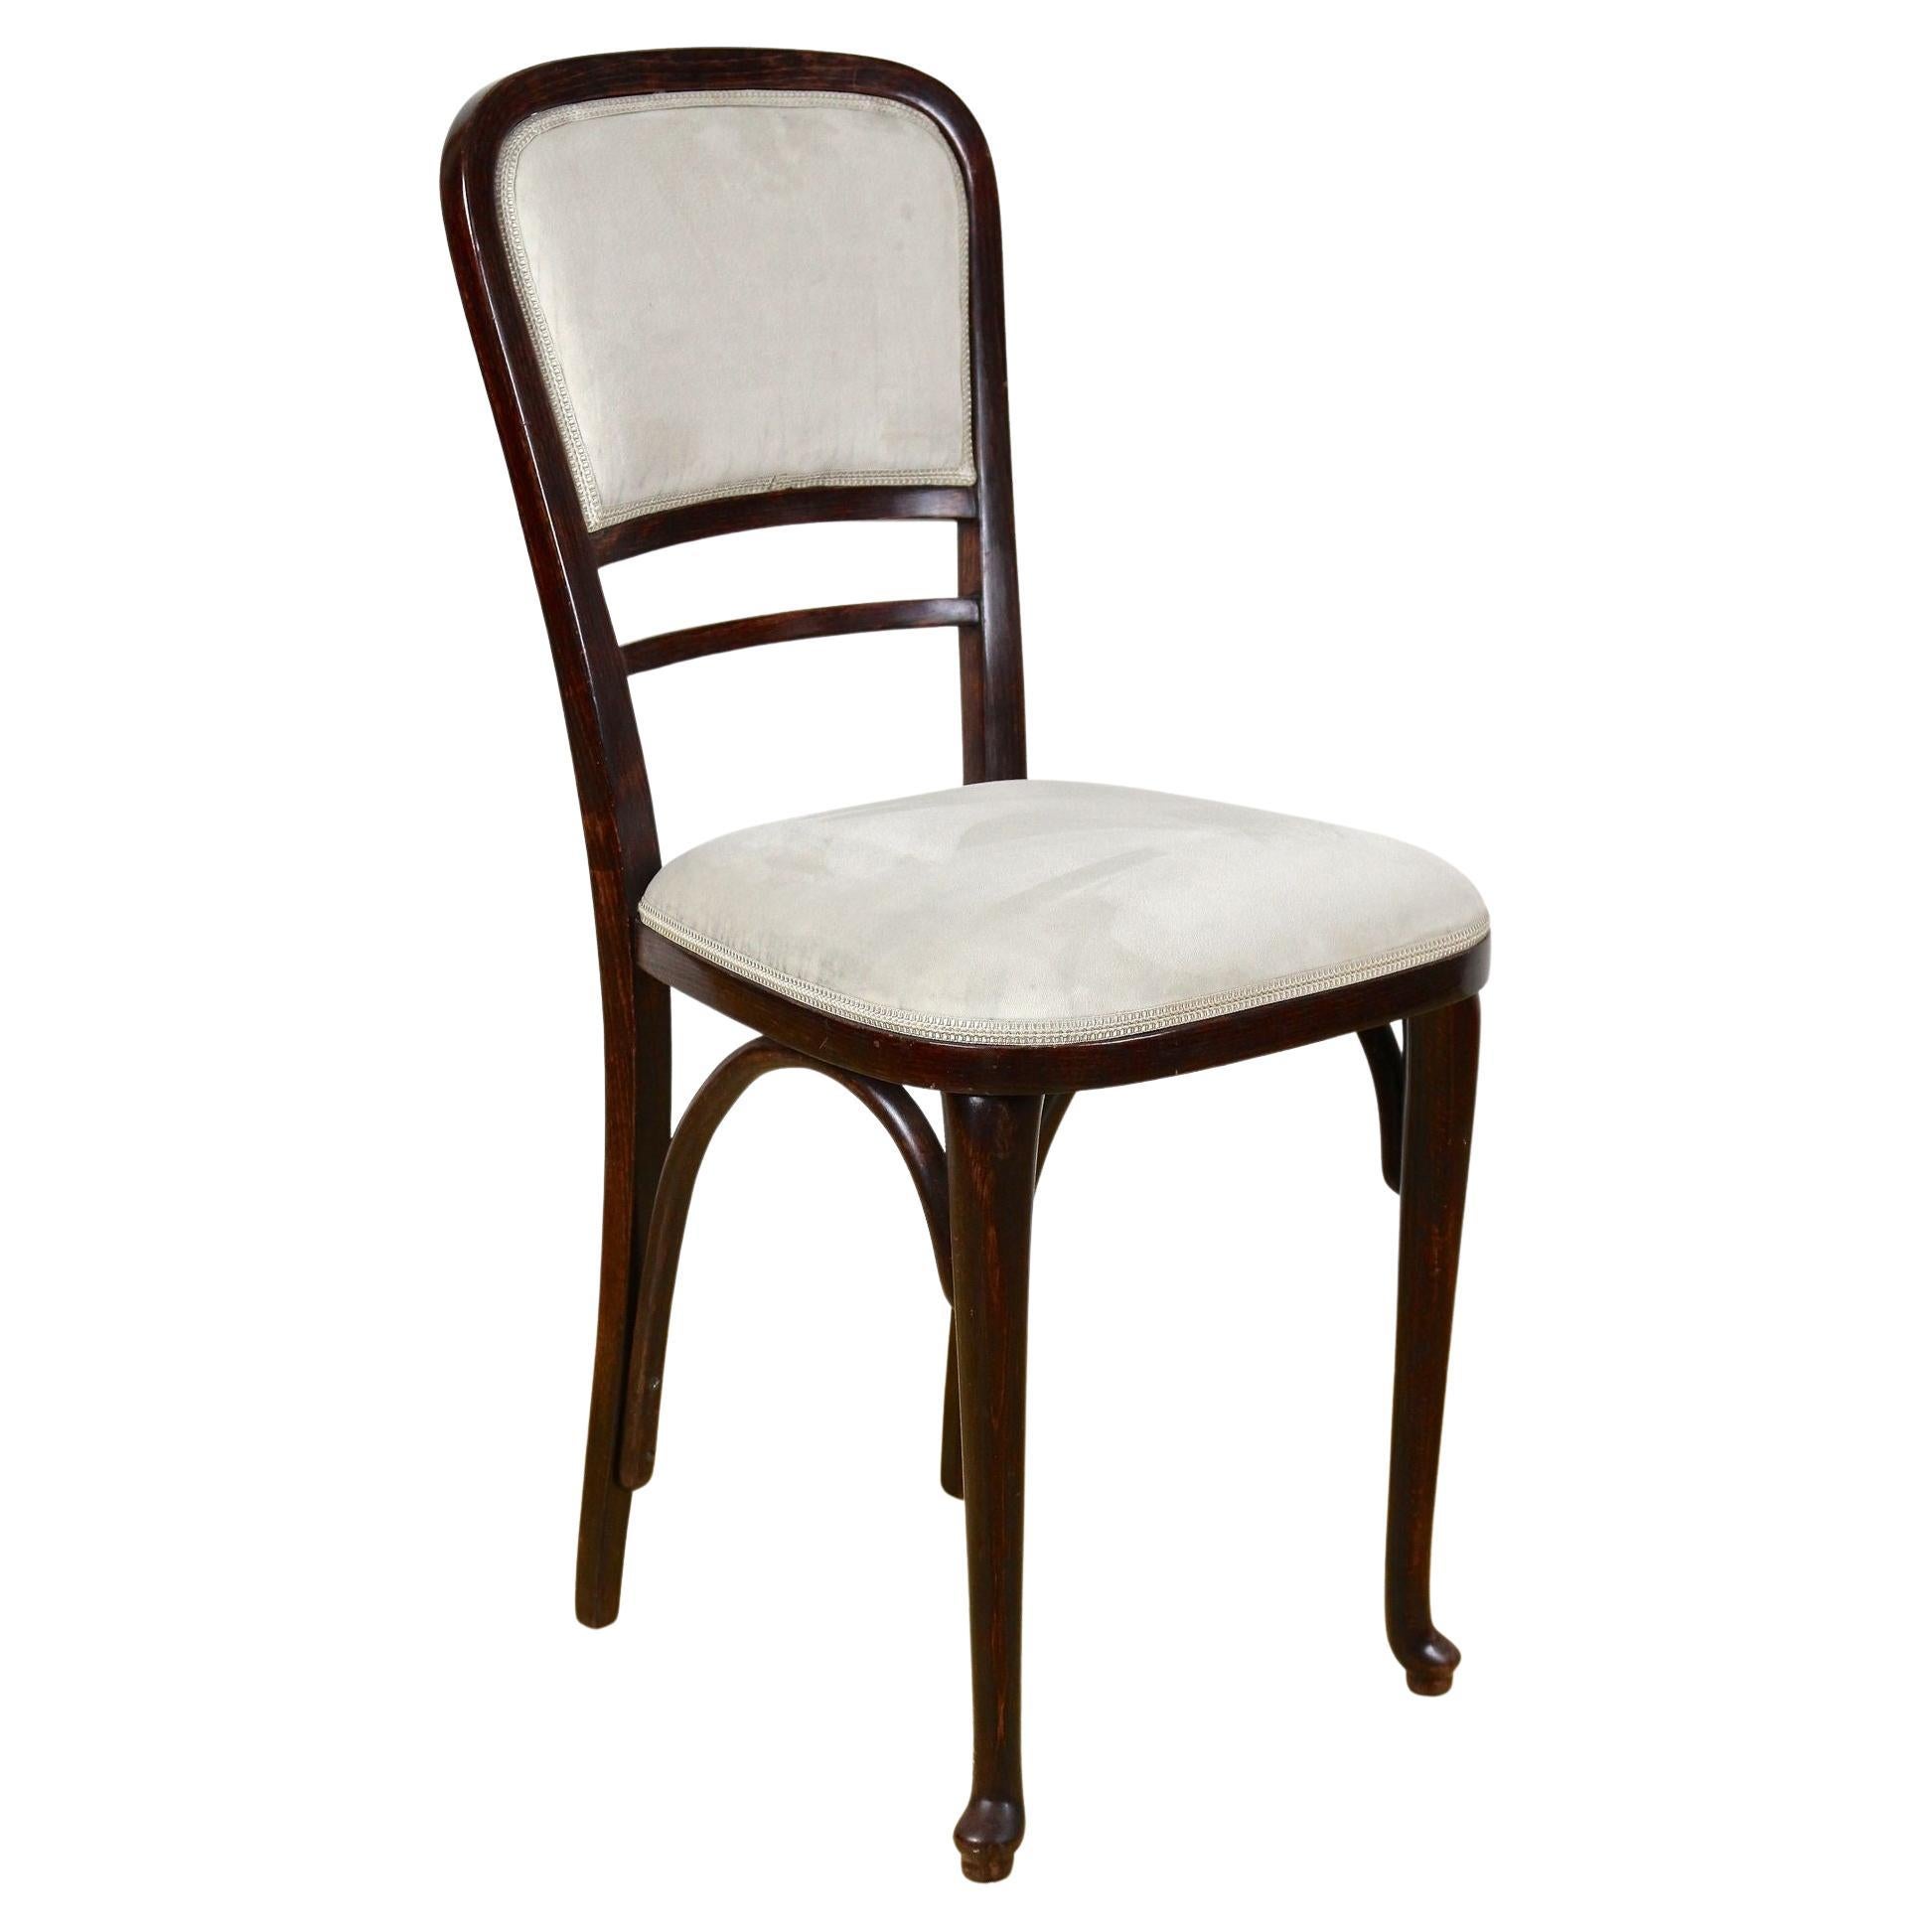 Art Nouveau Bentwood Chair by Thonet, Newly Upholstered, Austria, circa 1905